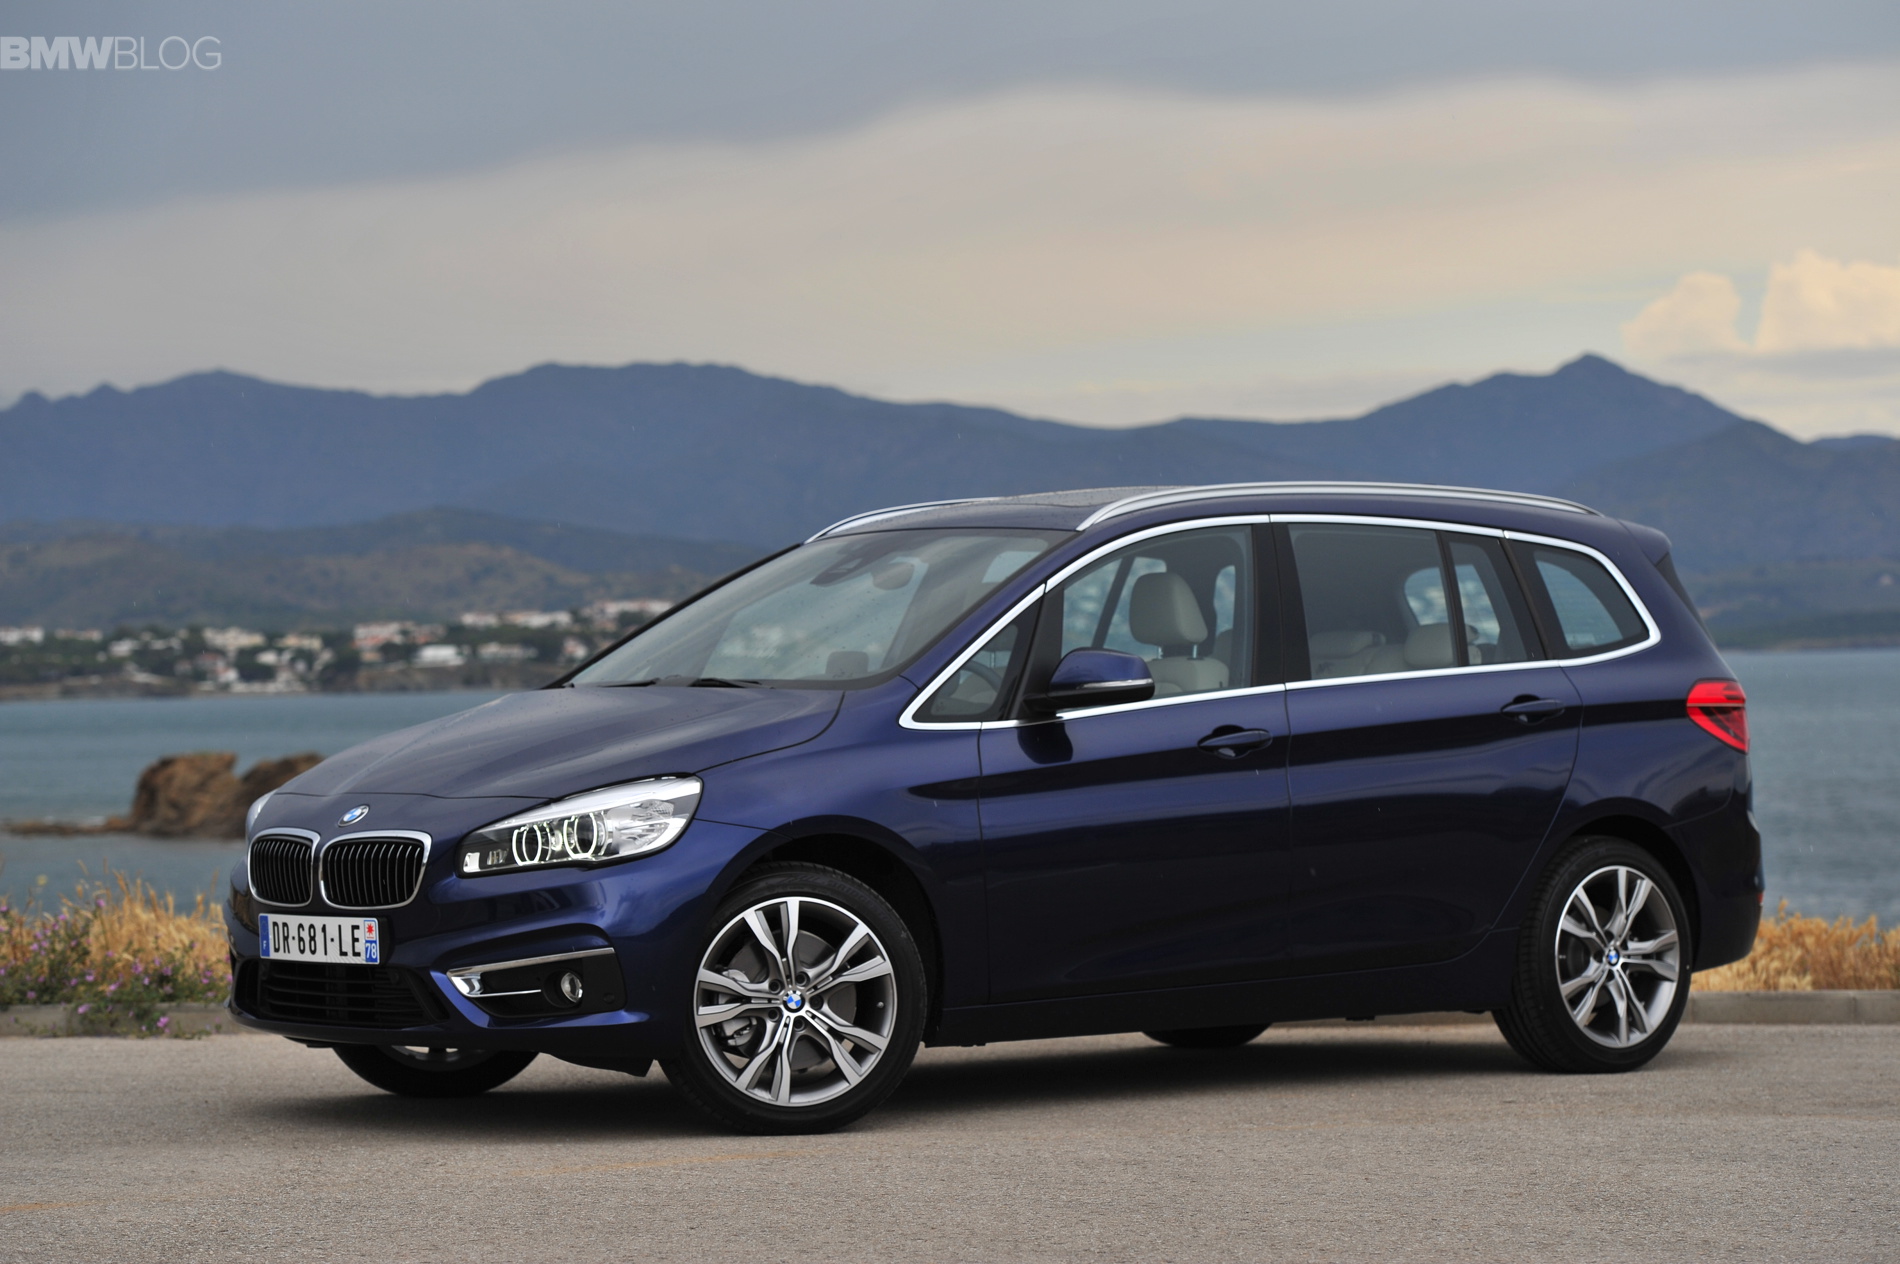 BMW 2 Series Gran Tourer launches in France